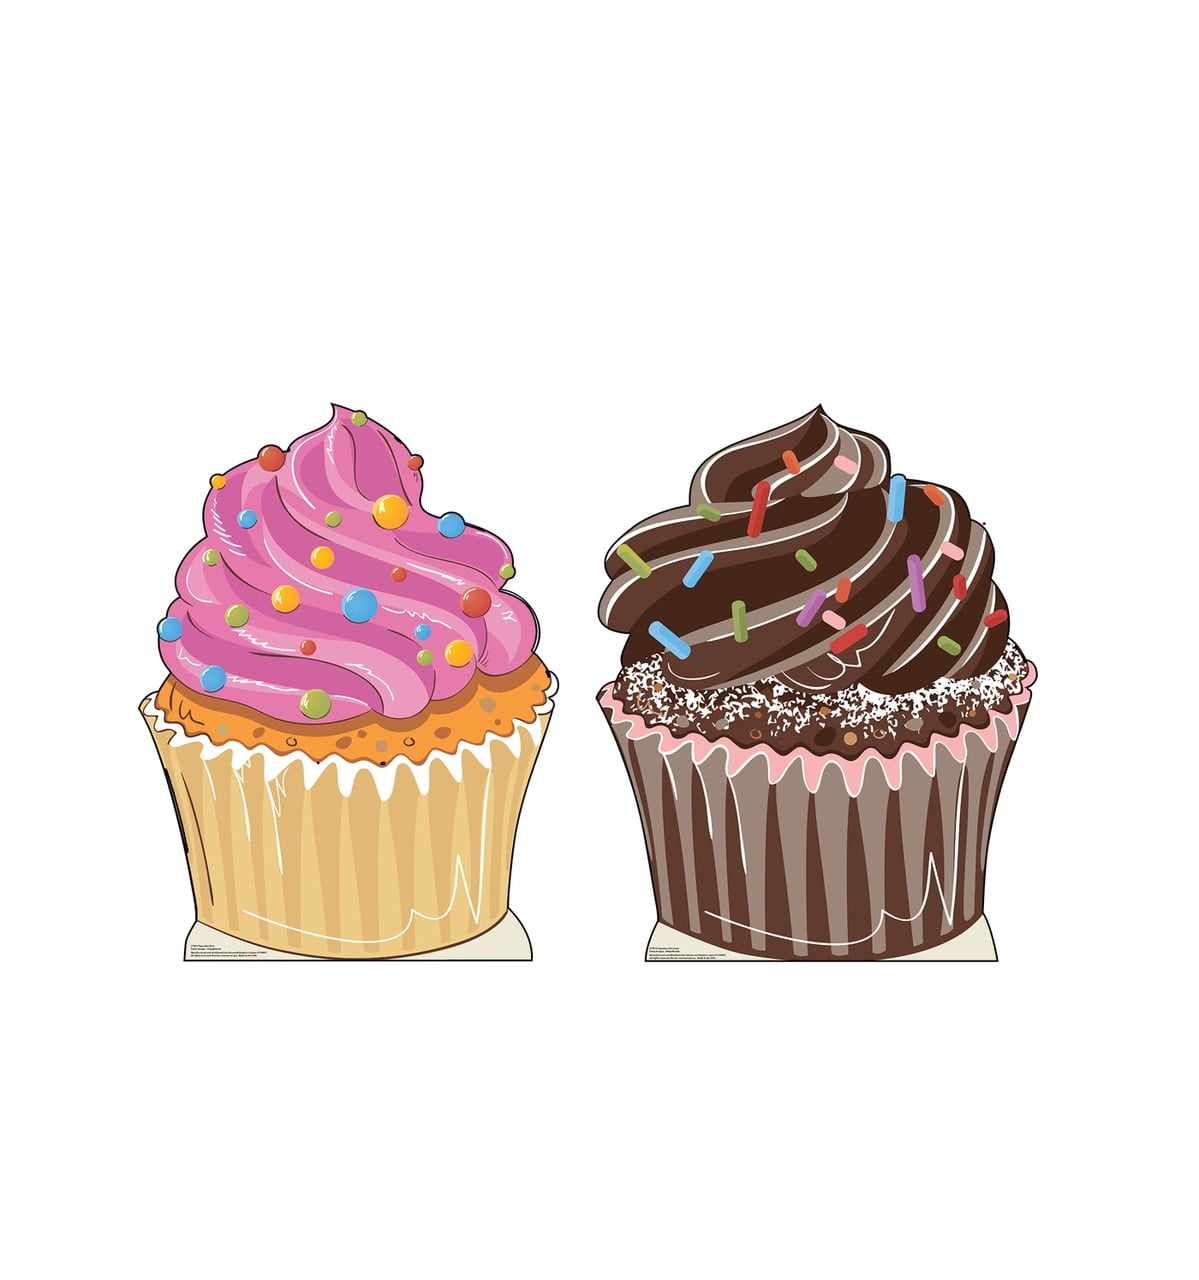 Picture of Advanced Graphics 2749 Cupcakes Cardboard Standup, 38 x 28 in.